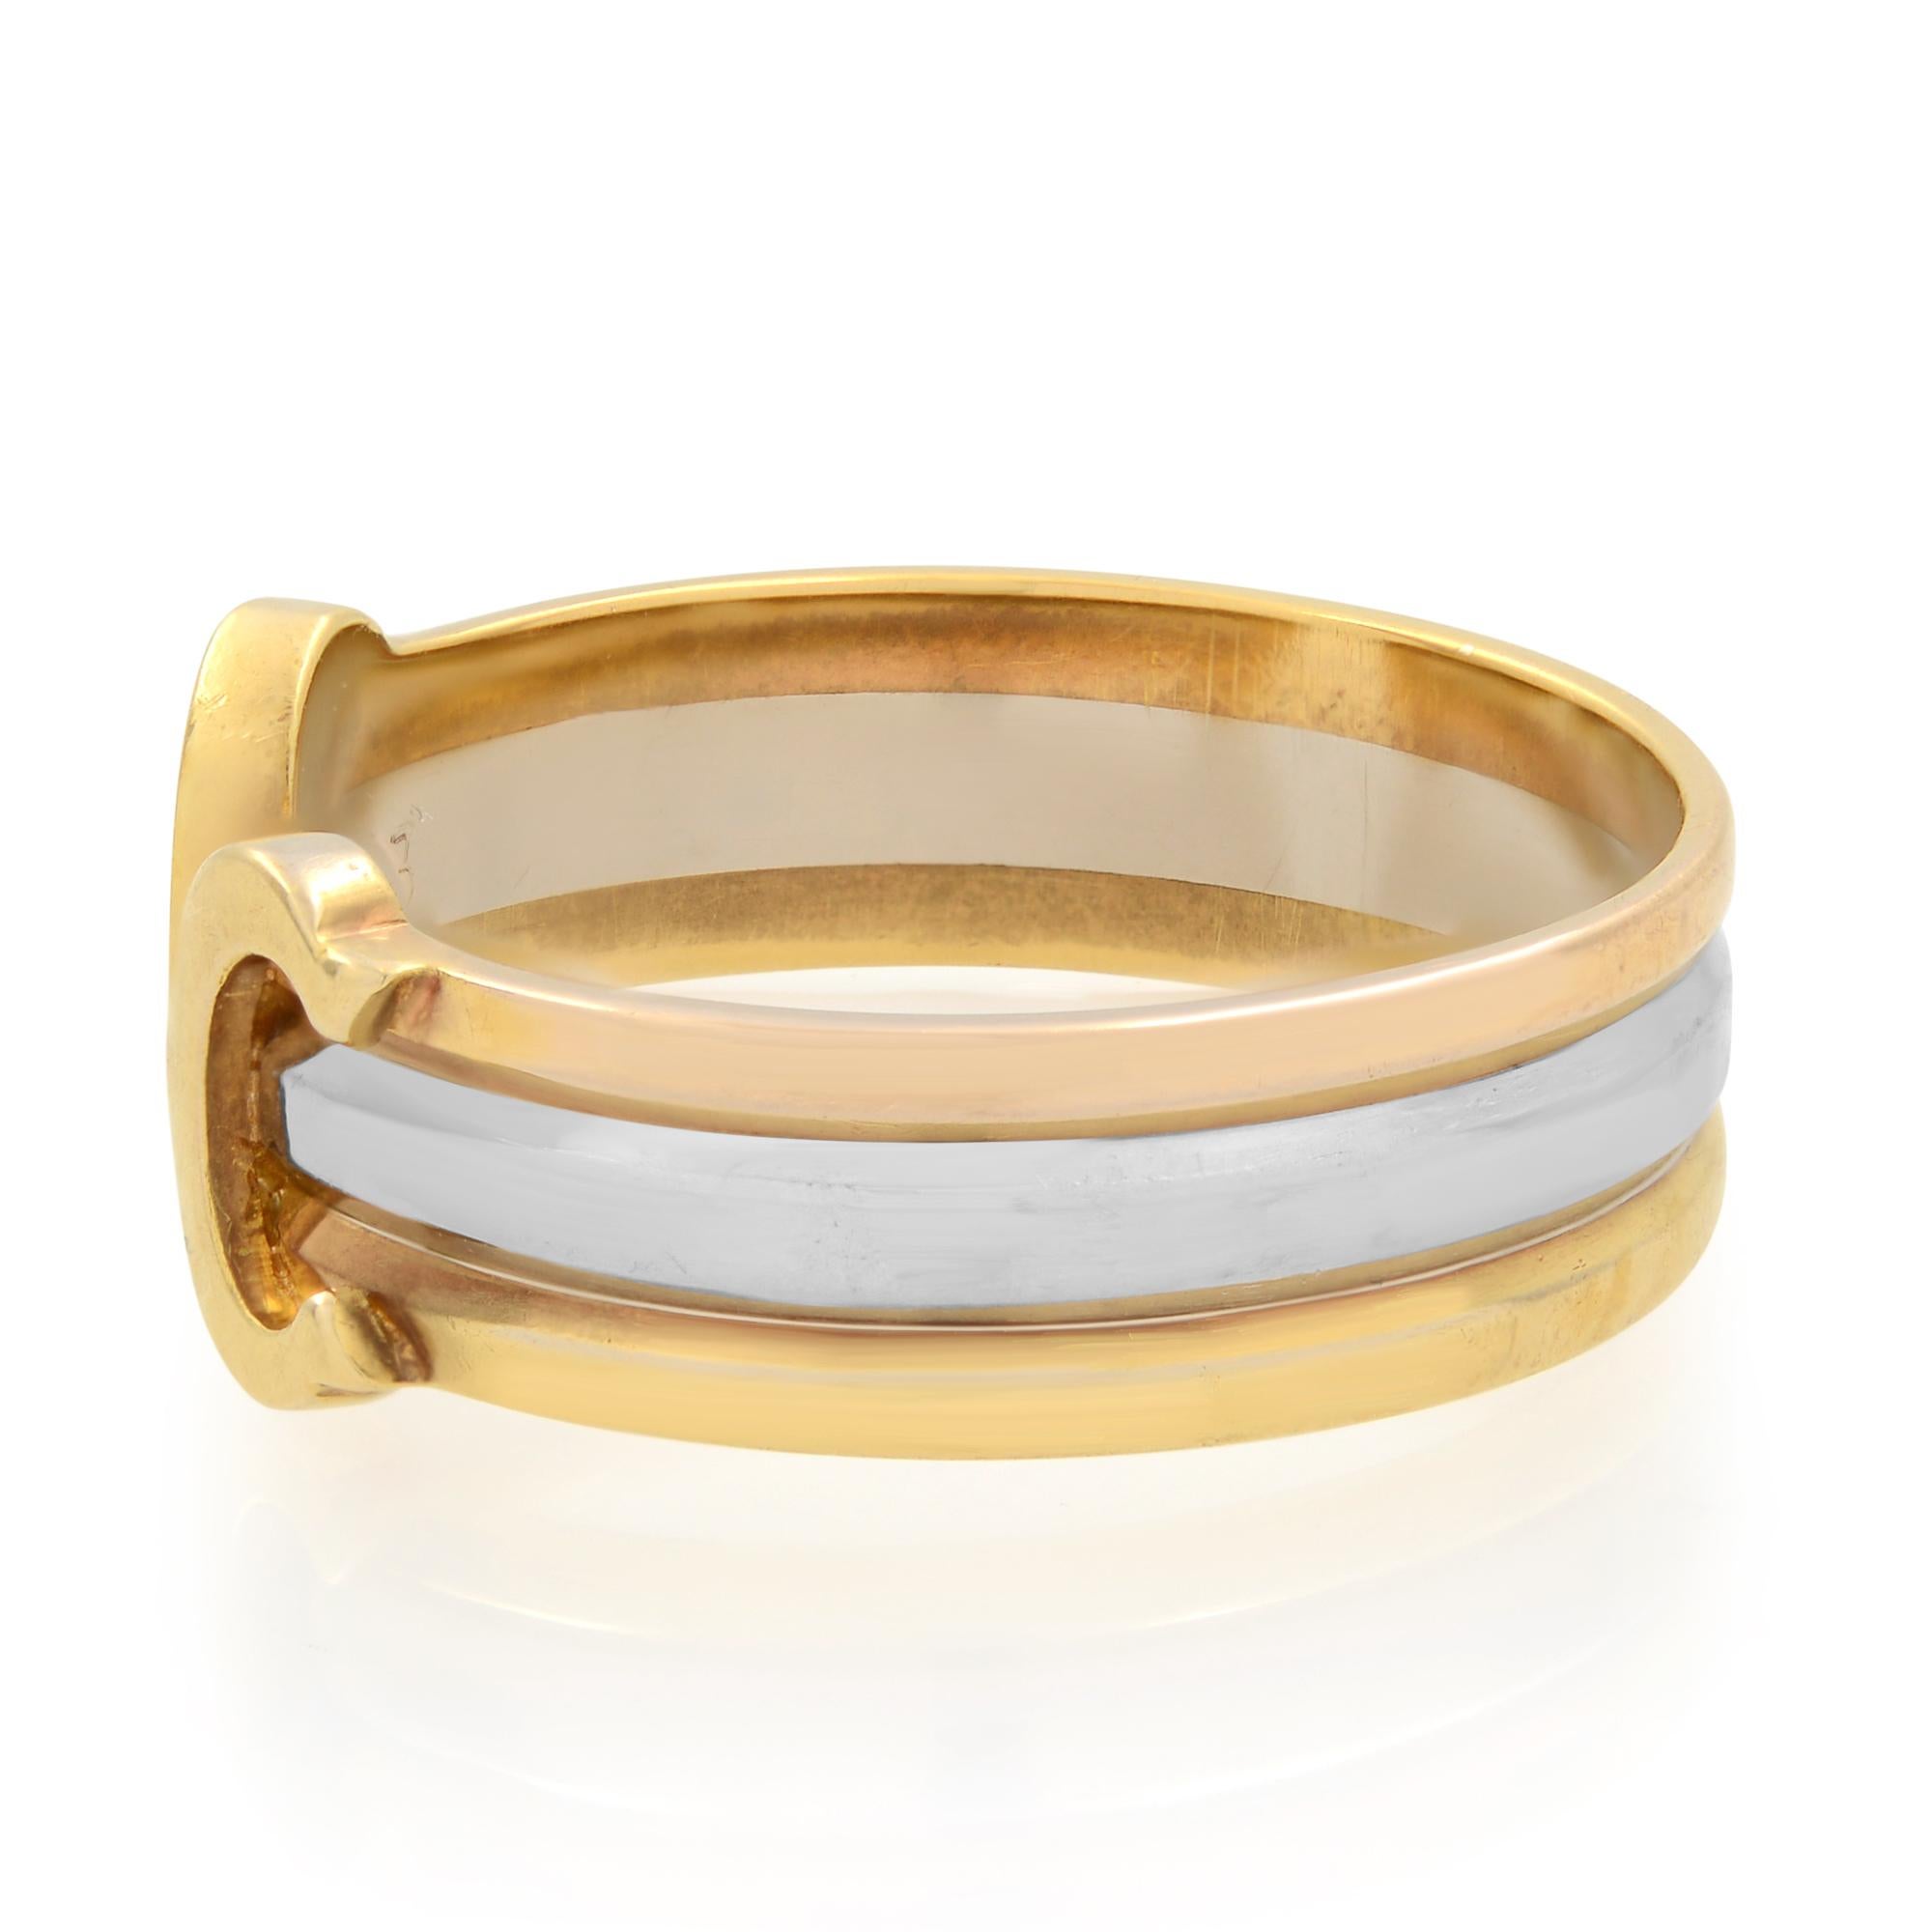 Cartier C De Cartier ring crafted in 18k rose, white and yellow gold. The open shank ring is comprised of three bands of tri color gold. Cartier's trademark C shape is featured at each end of the split facing inward. The ring is stamped 750 and